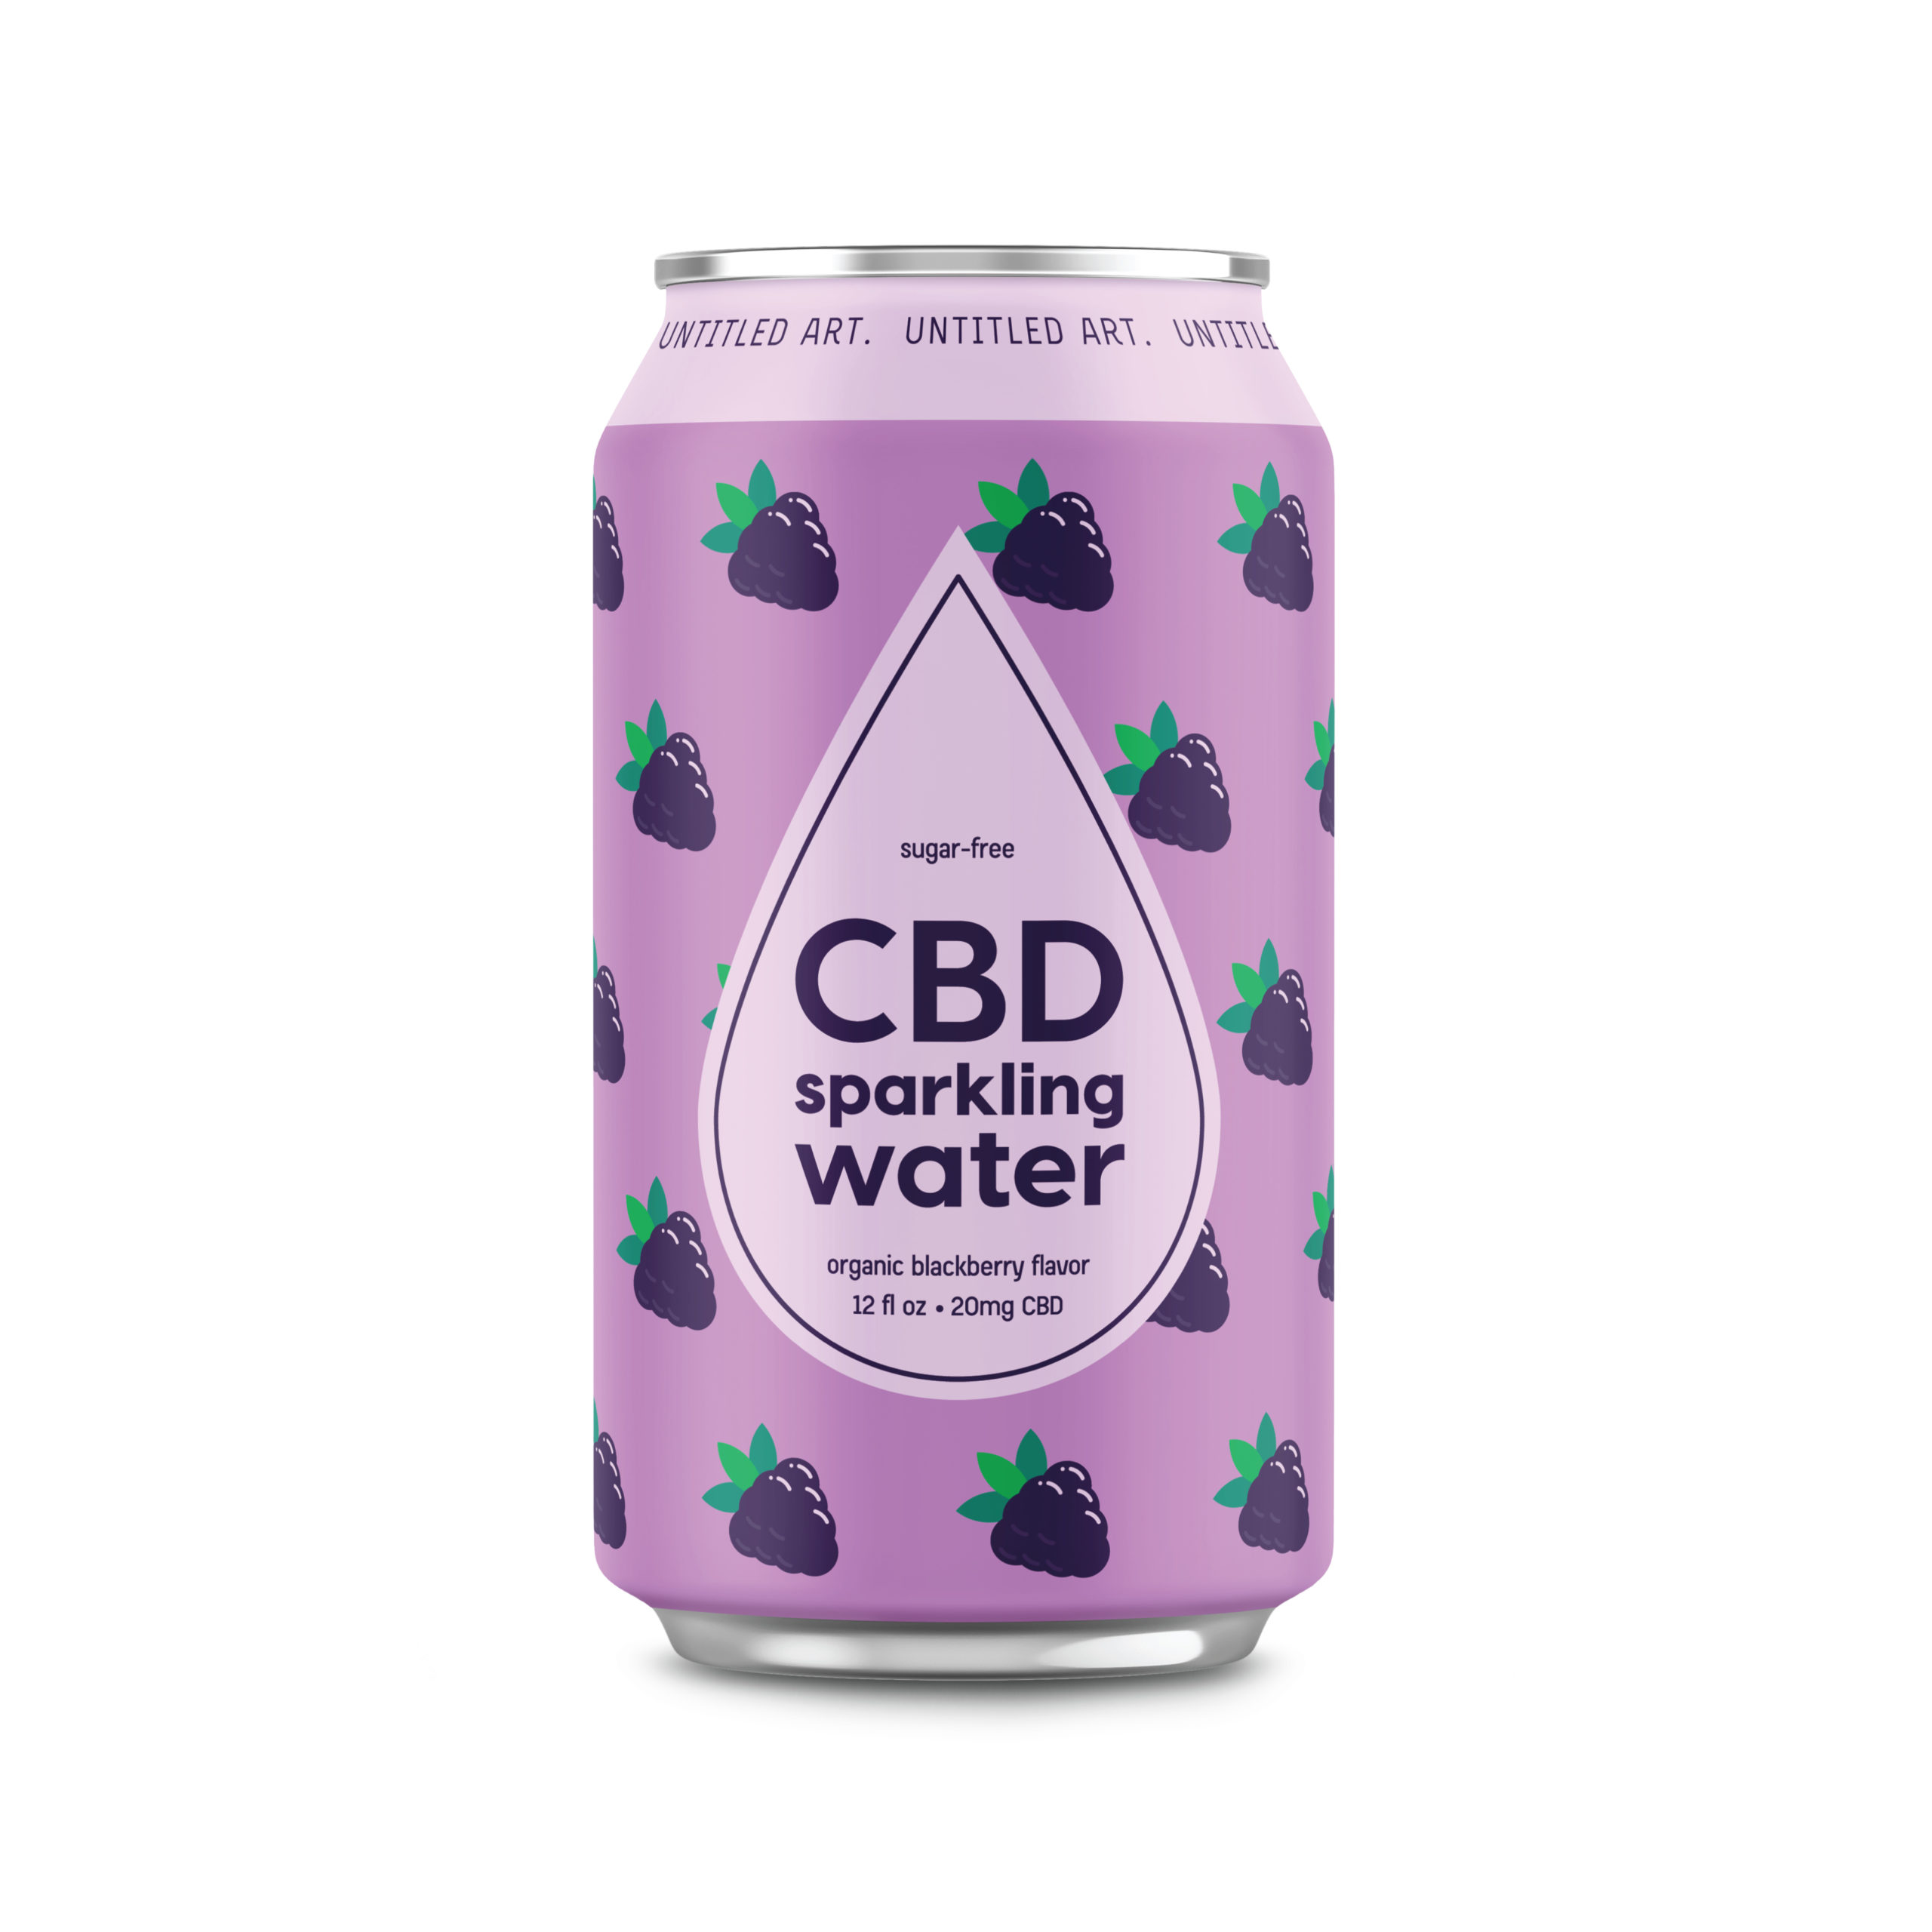 A can of cbd drinking water with blackberries on it.